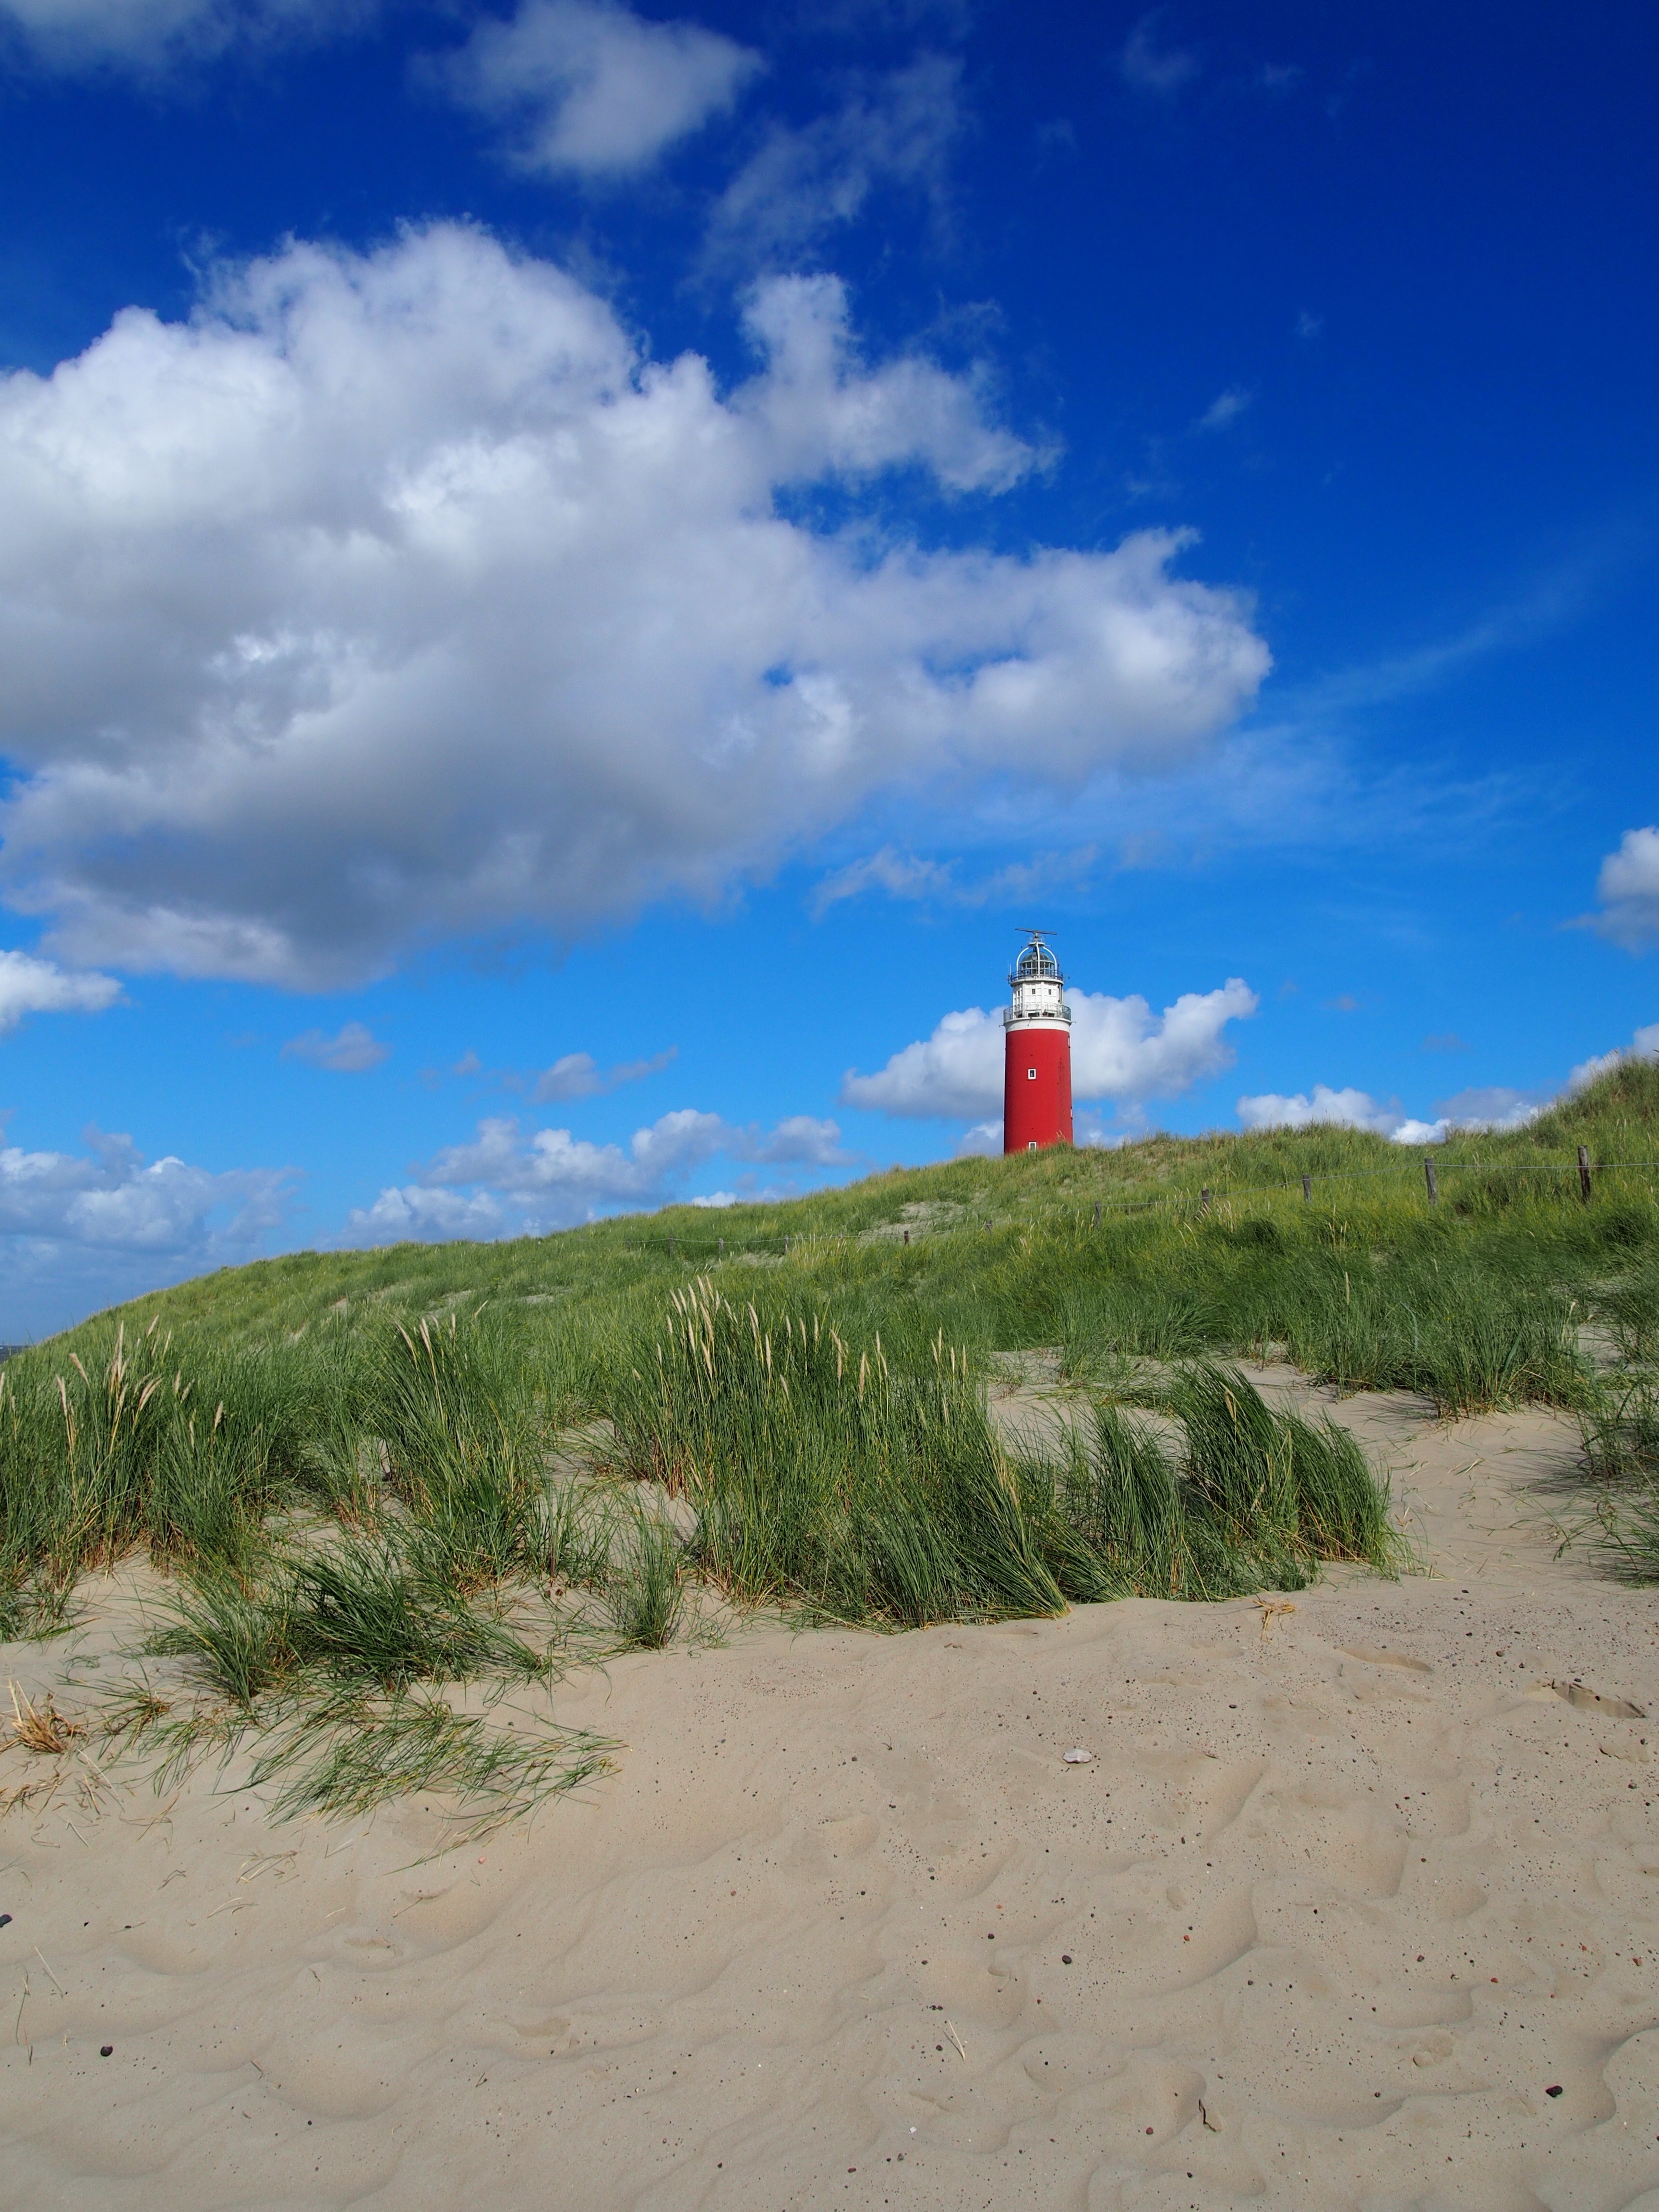 red and white light house near grass field under blue sunny cloudy sky